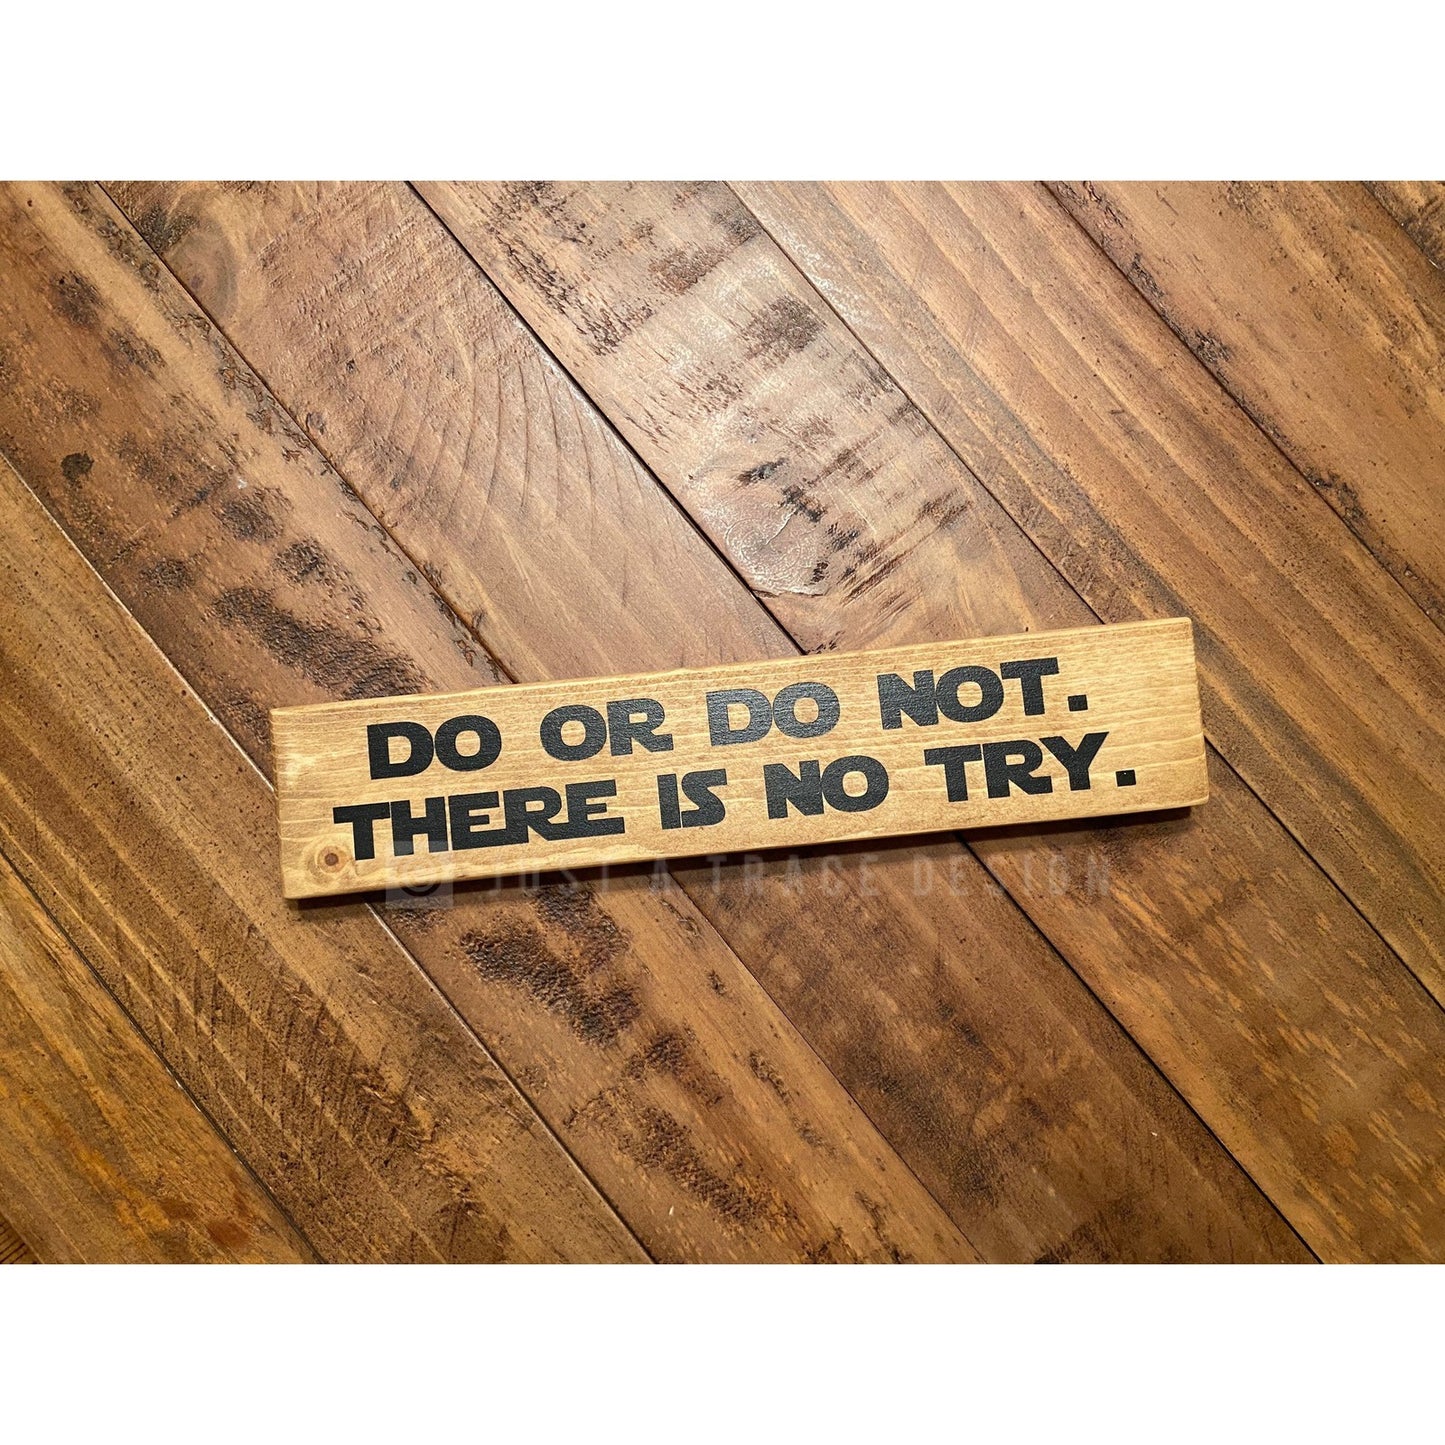 Do Or Do Not. There Is No Try. - Wood Sign - Wooden Sign - Home Decor - Star Wars - 12" x 2.25